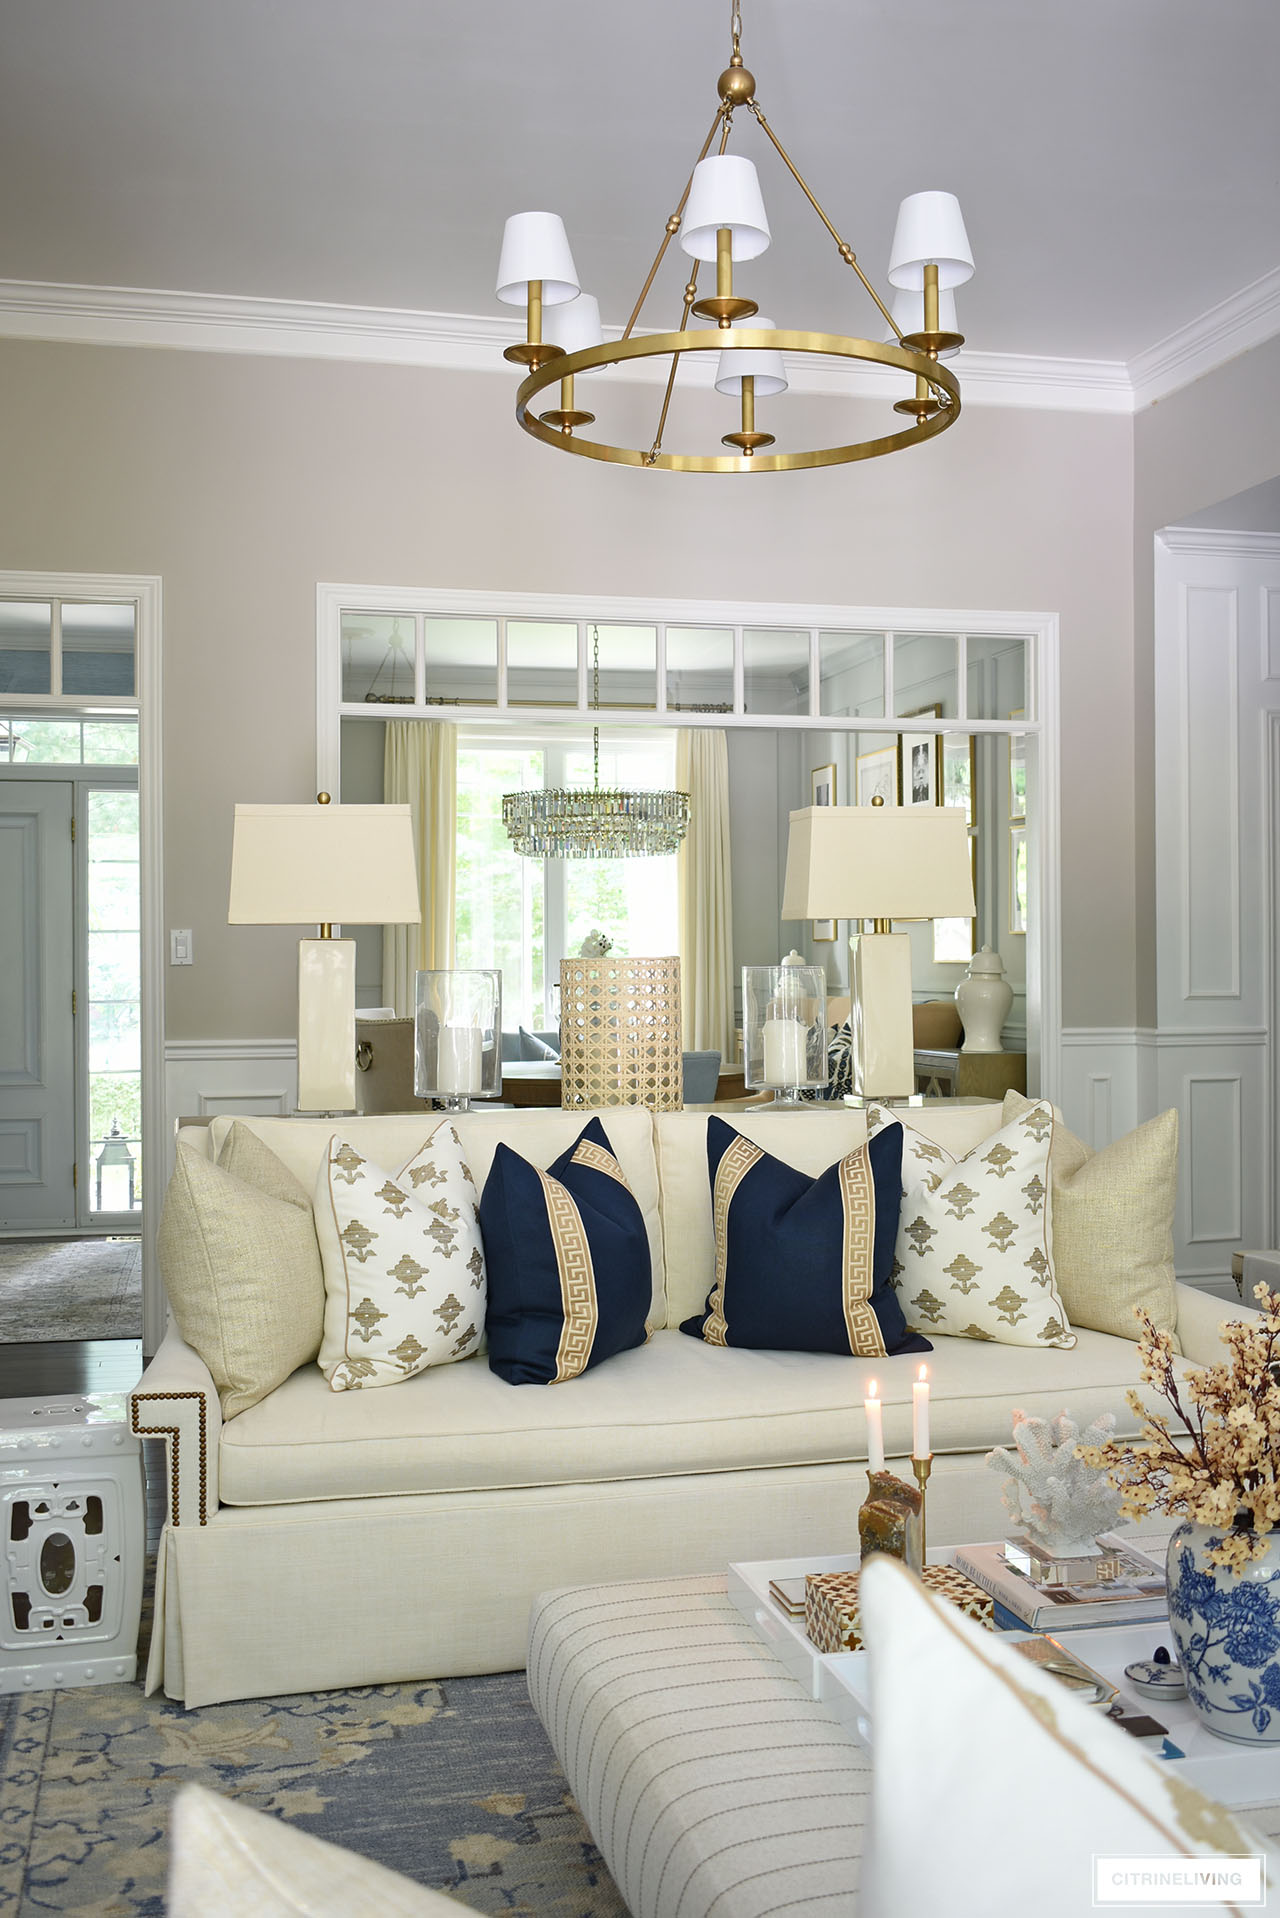 Fall living room decor with rich colors in navy and tan paired with gold and warm white.